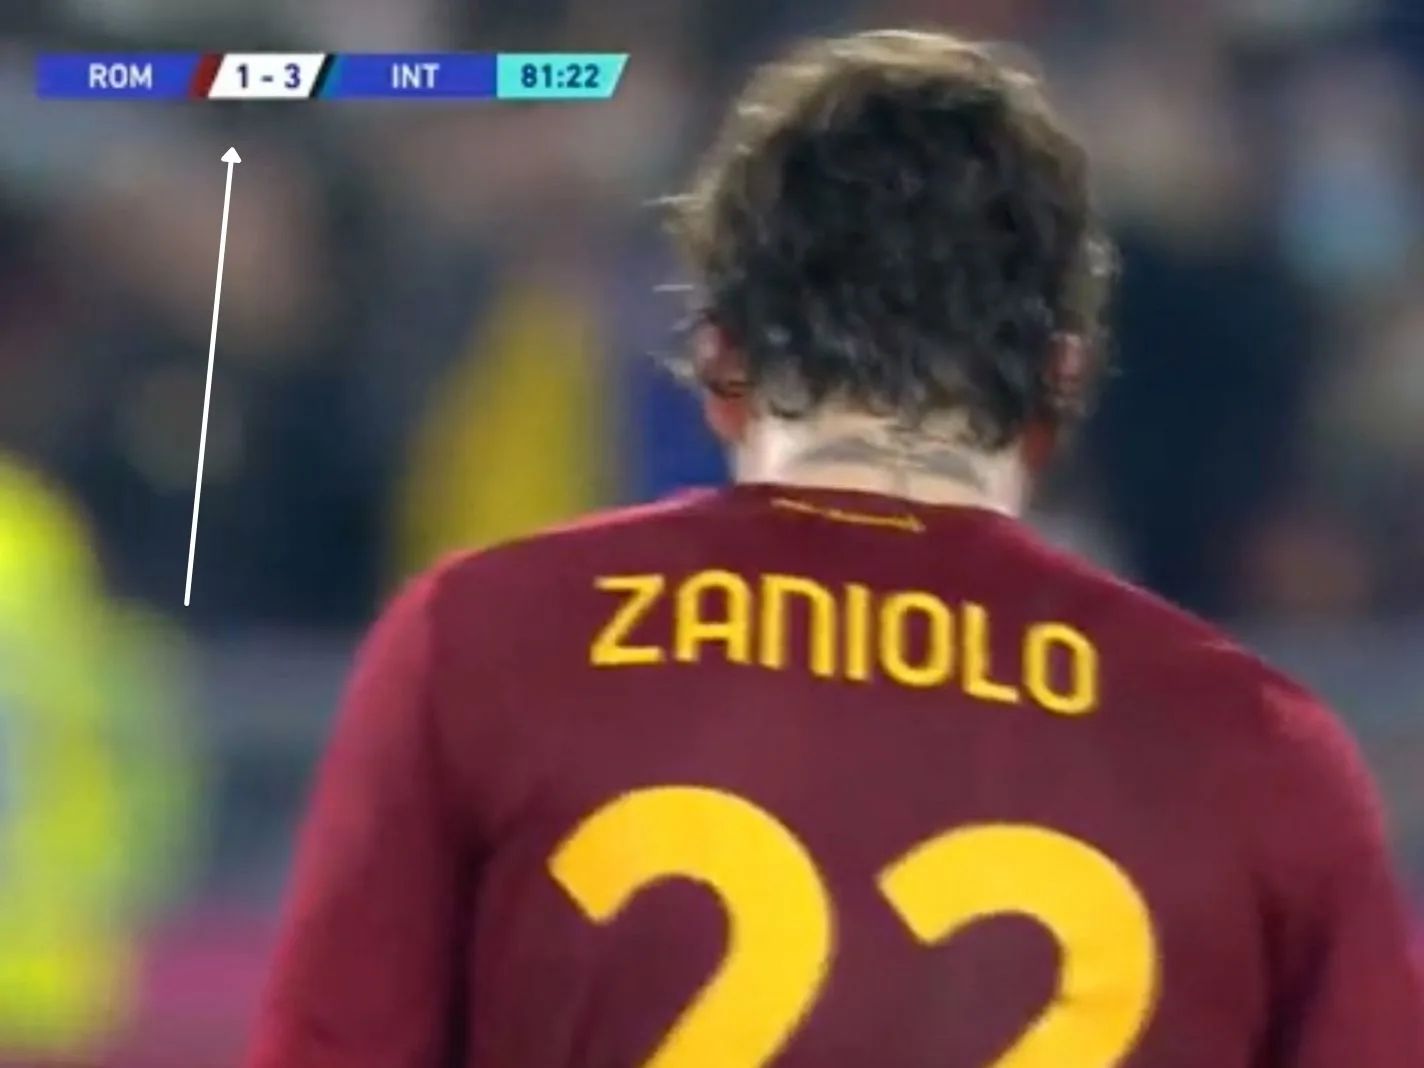 From commentators to the scoreboard The fake goal from Zaniolo that fooled everyone during Inter v Roma